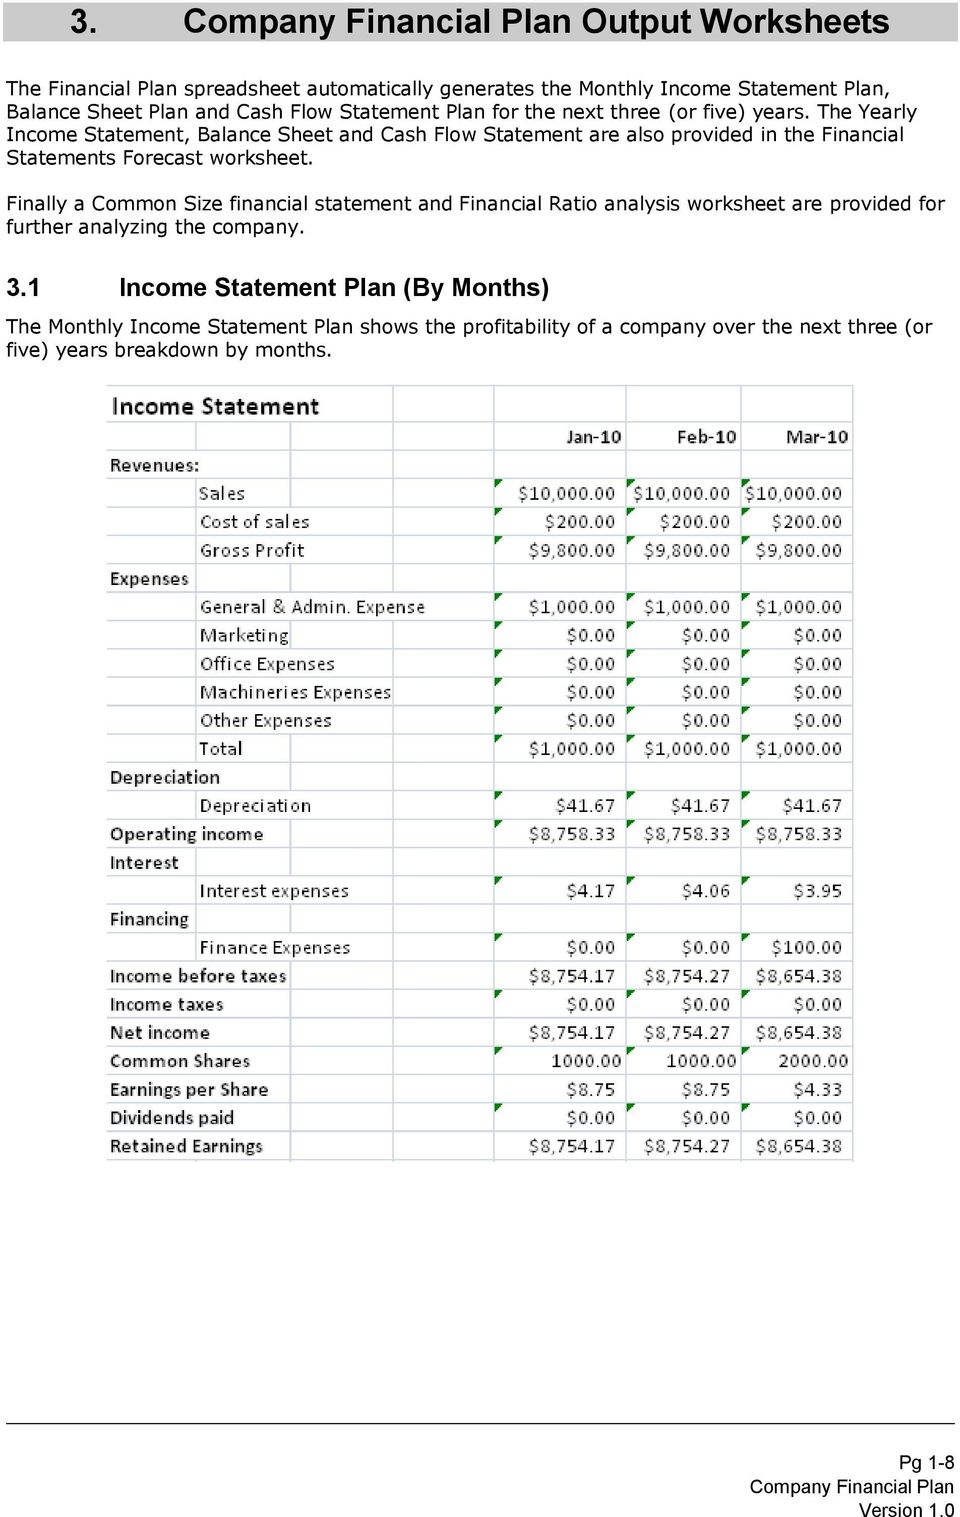 The Yearly Income Statement, Balance Sheet and Cash Flow Statement are also provided in the Financial Statements Forecast worksheet.